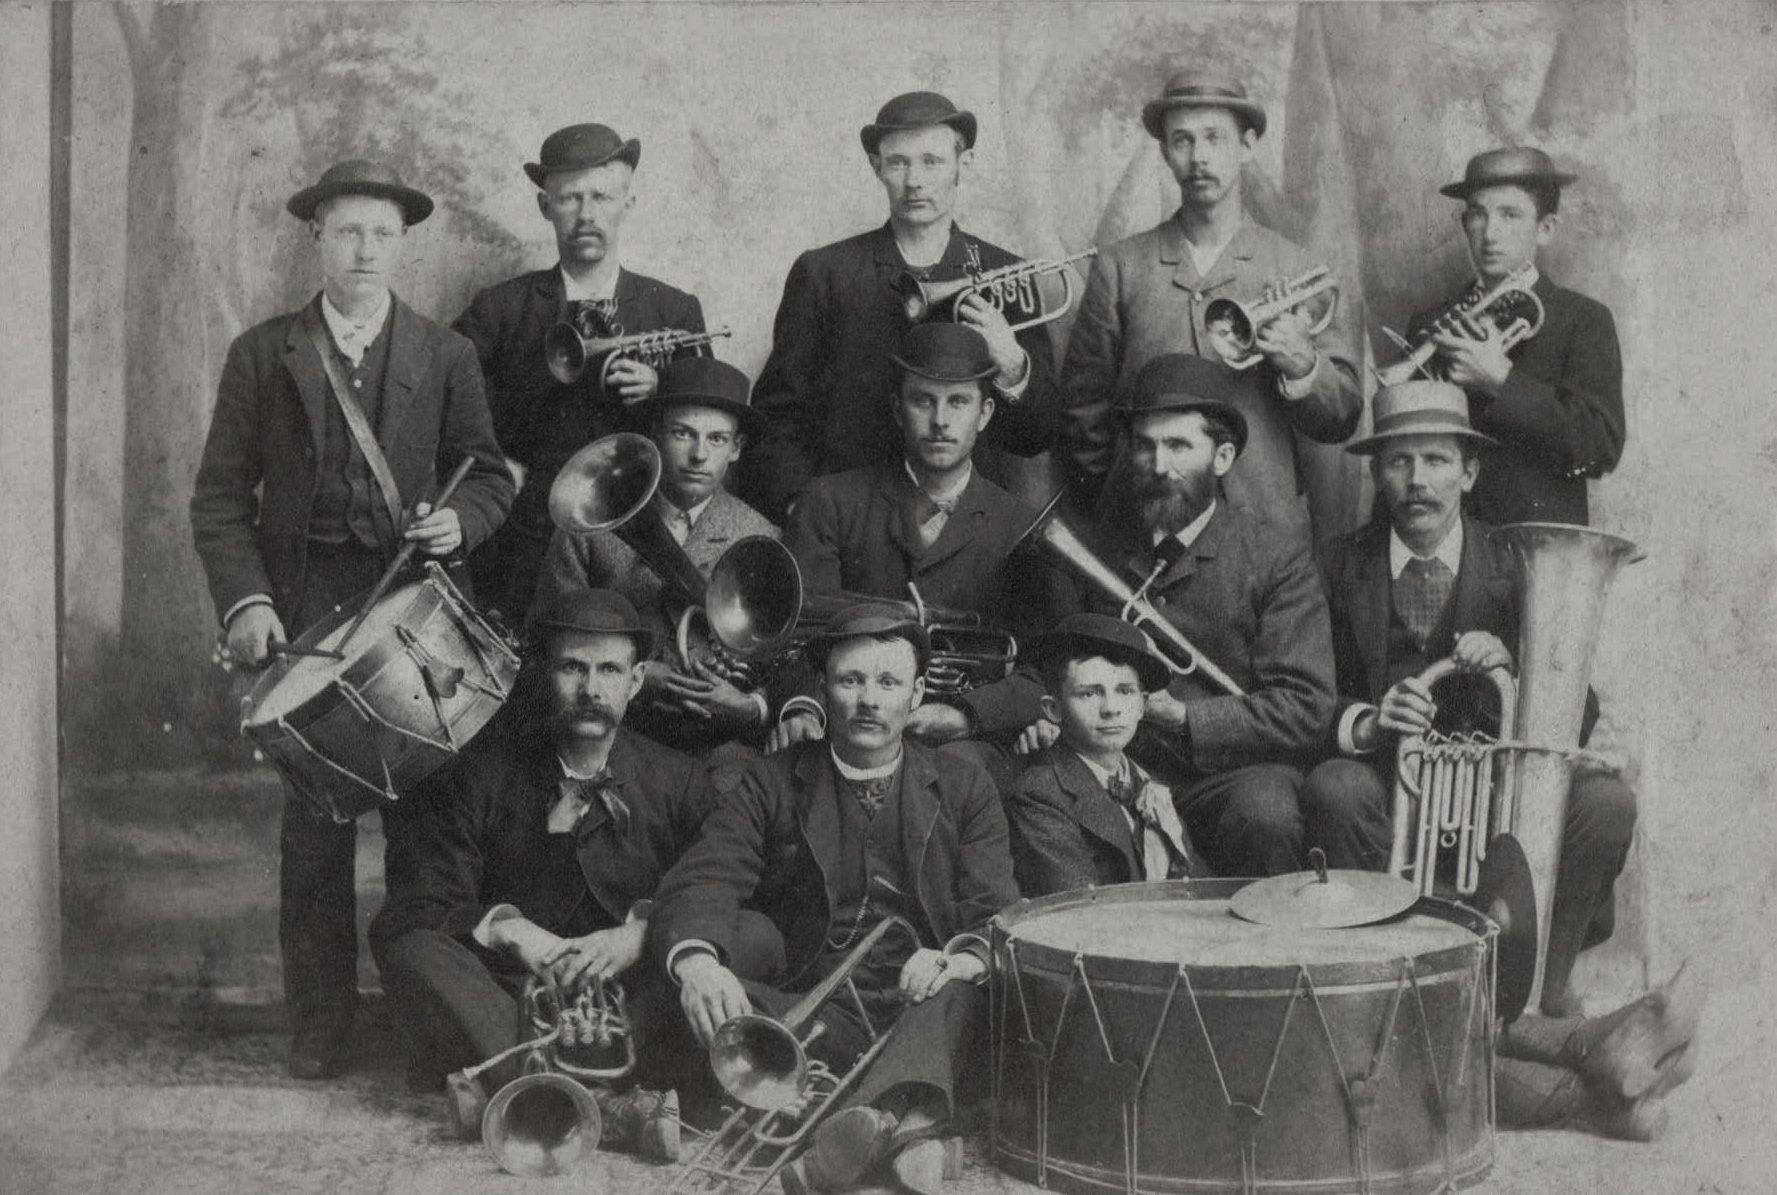 I'm assuming this was some kind of town band in WNY. My great-great-grandfather is the one seated on the far left. I'm guessing this photo was taken around 1880.jpg